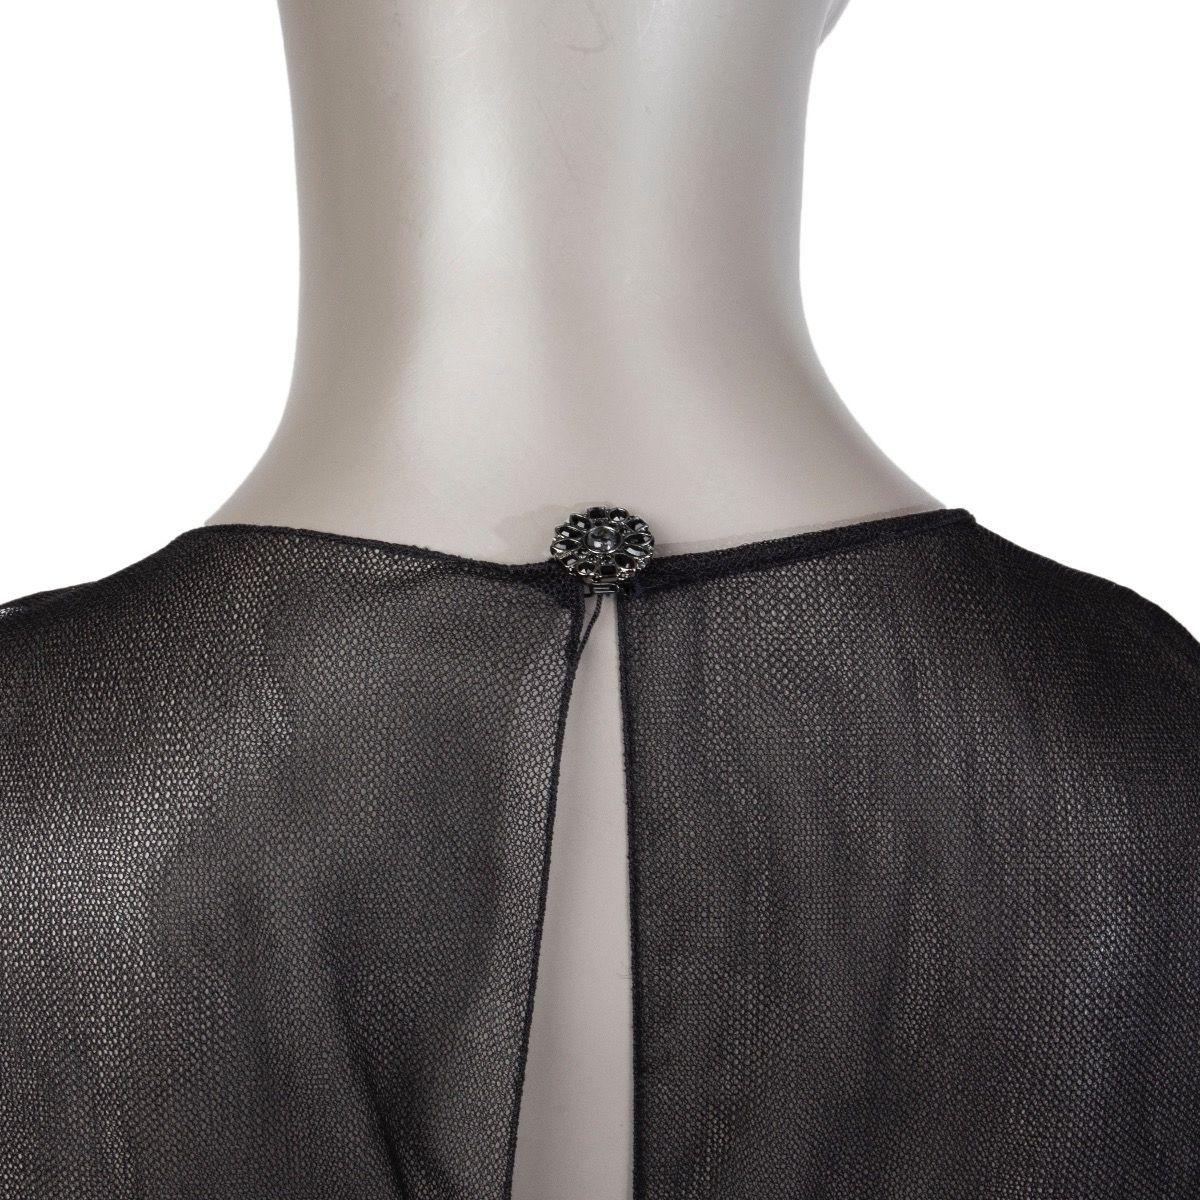 CHANEL black tulle Embellished Ruffle Cocktail Dress 36 XS For Sale 2